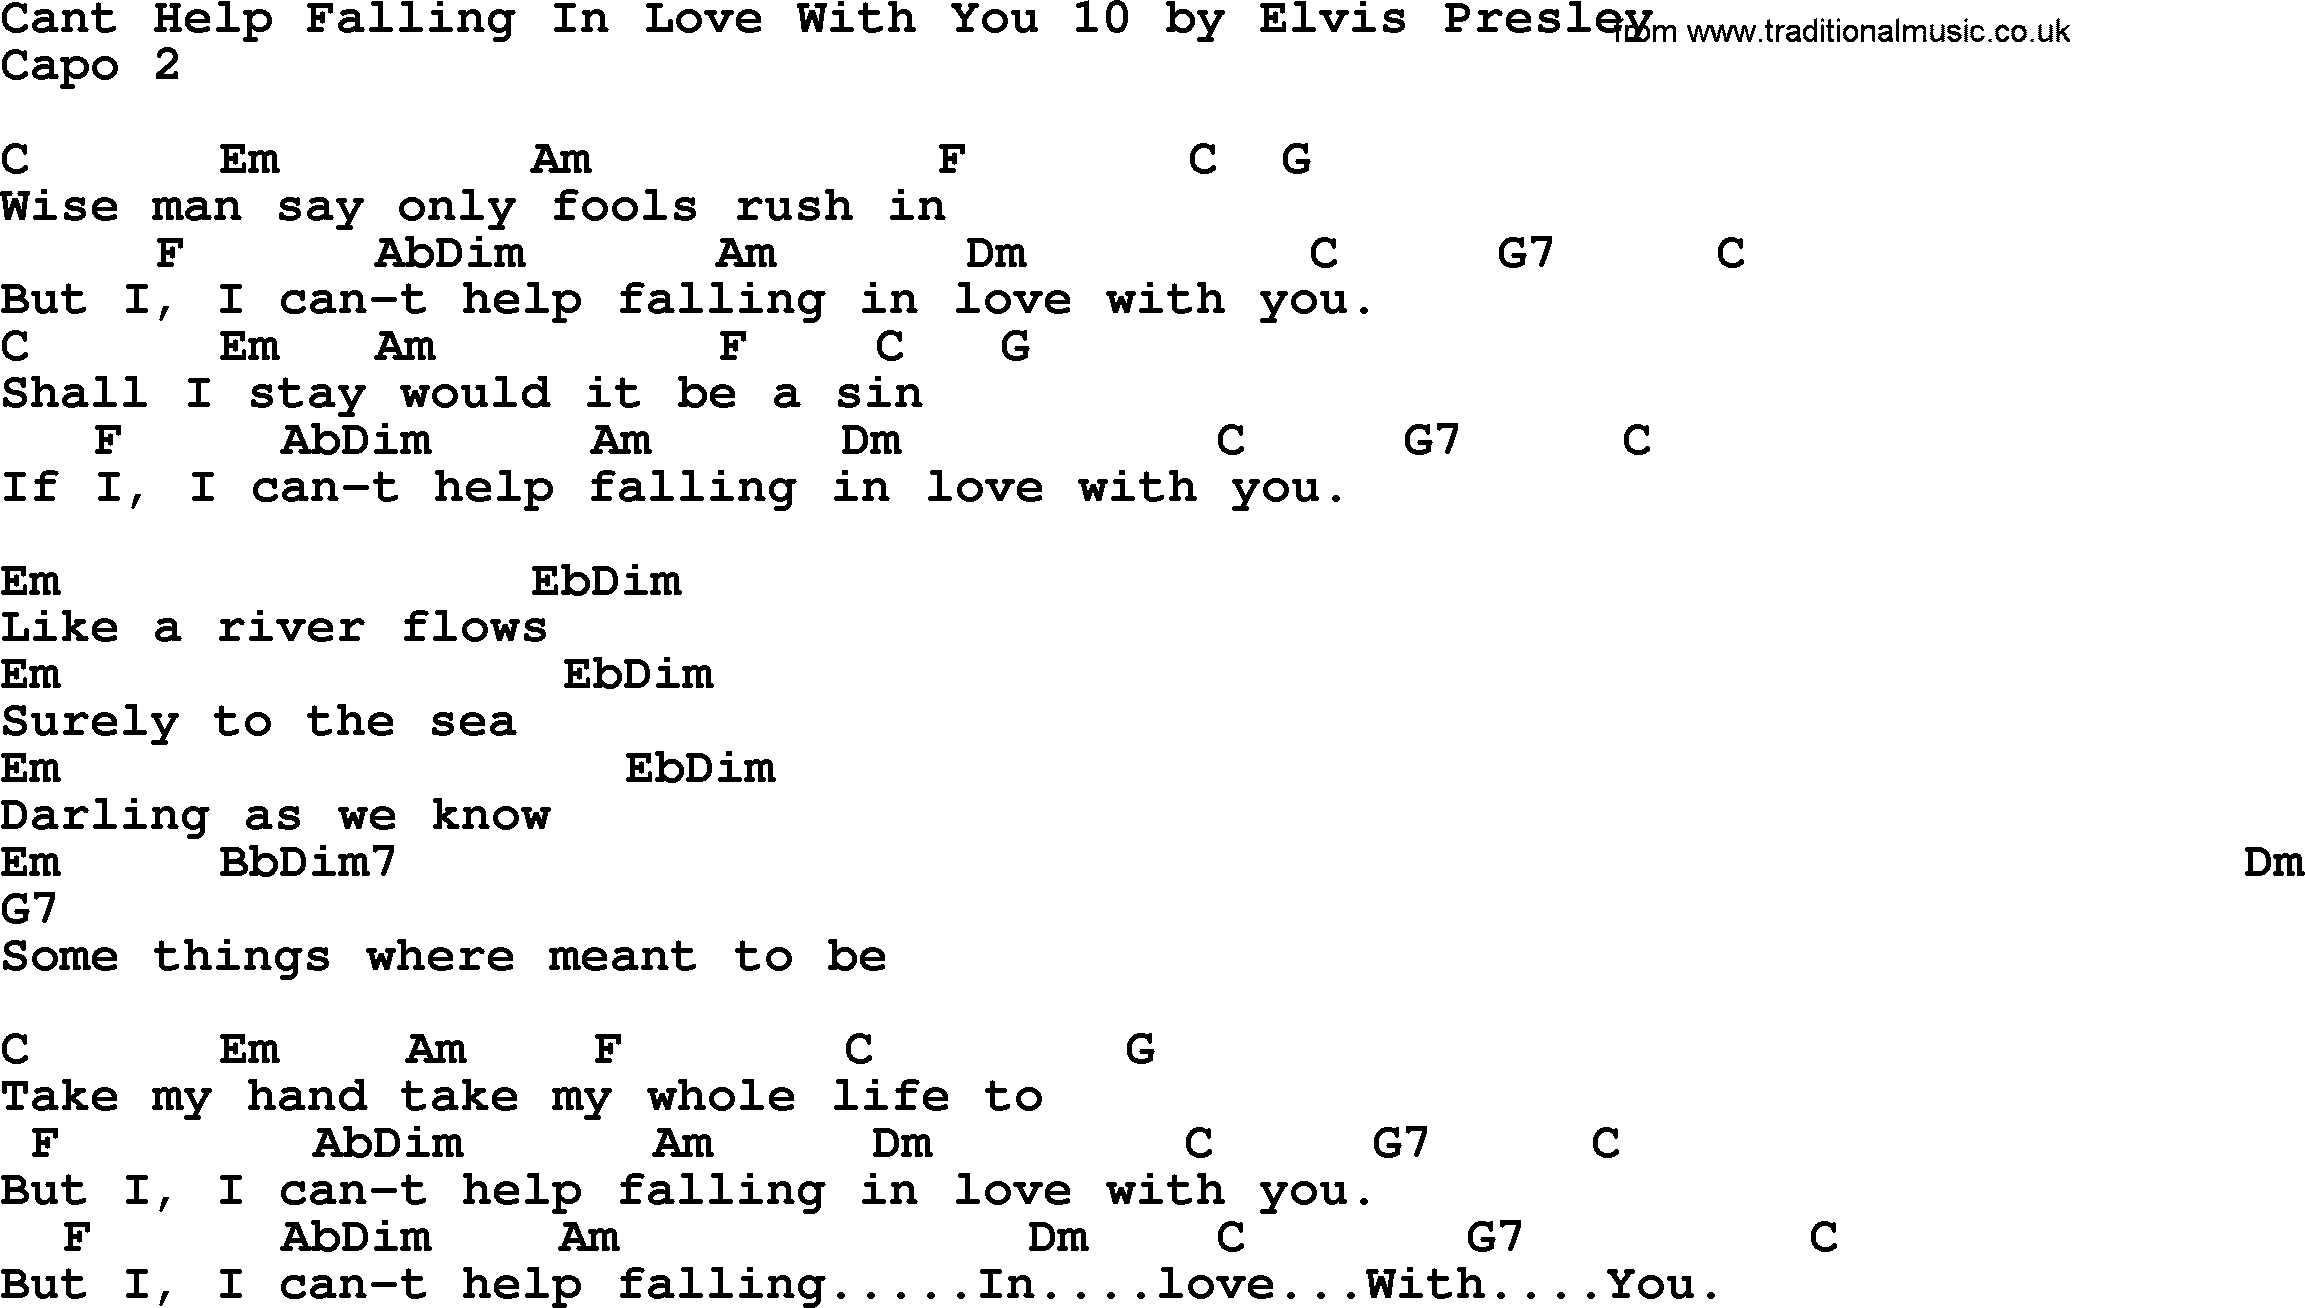 I Can T Help Falling In Love With You Chords Cant Help Falling In Love With You 10 Elvis Presley Lyrics And